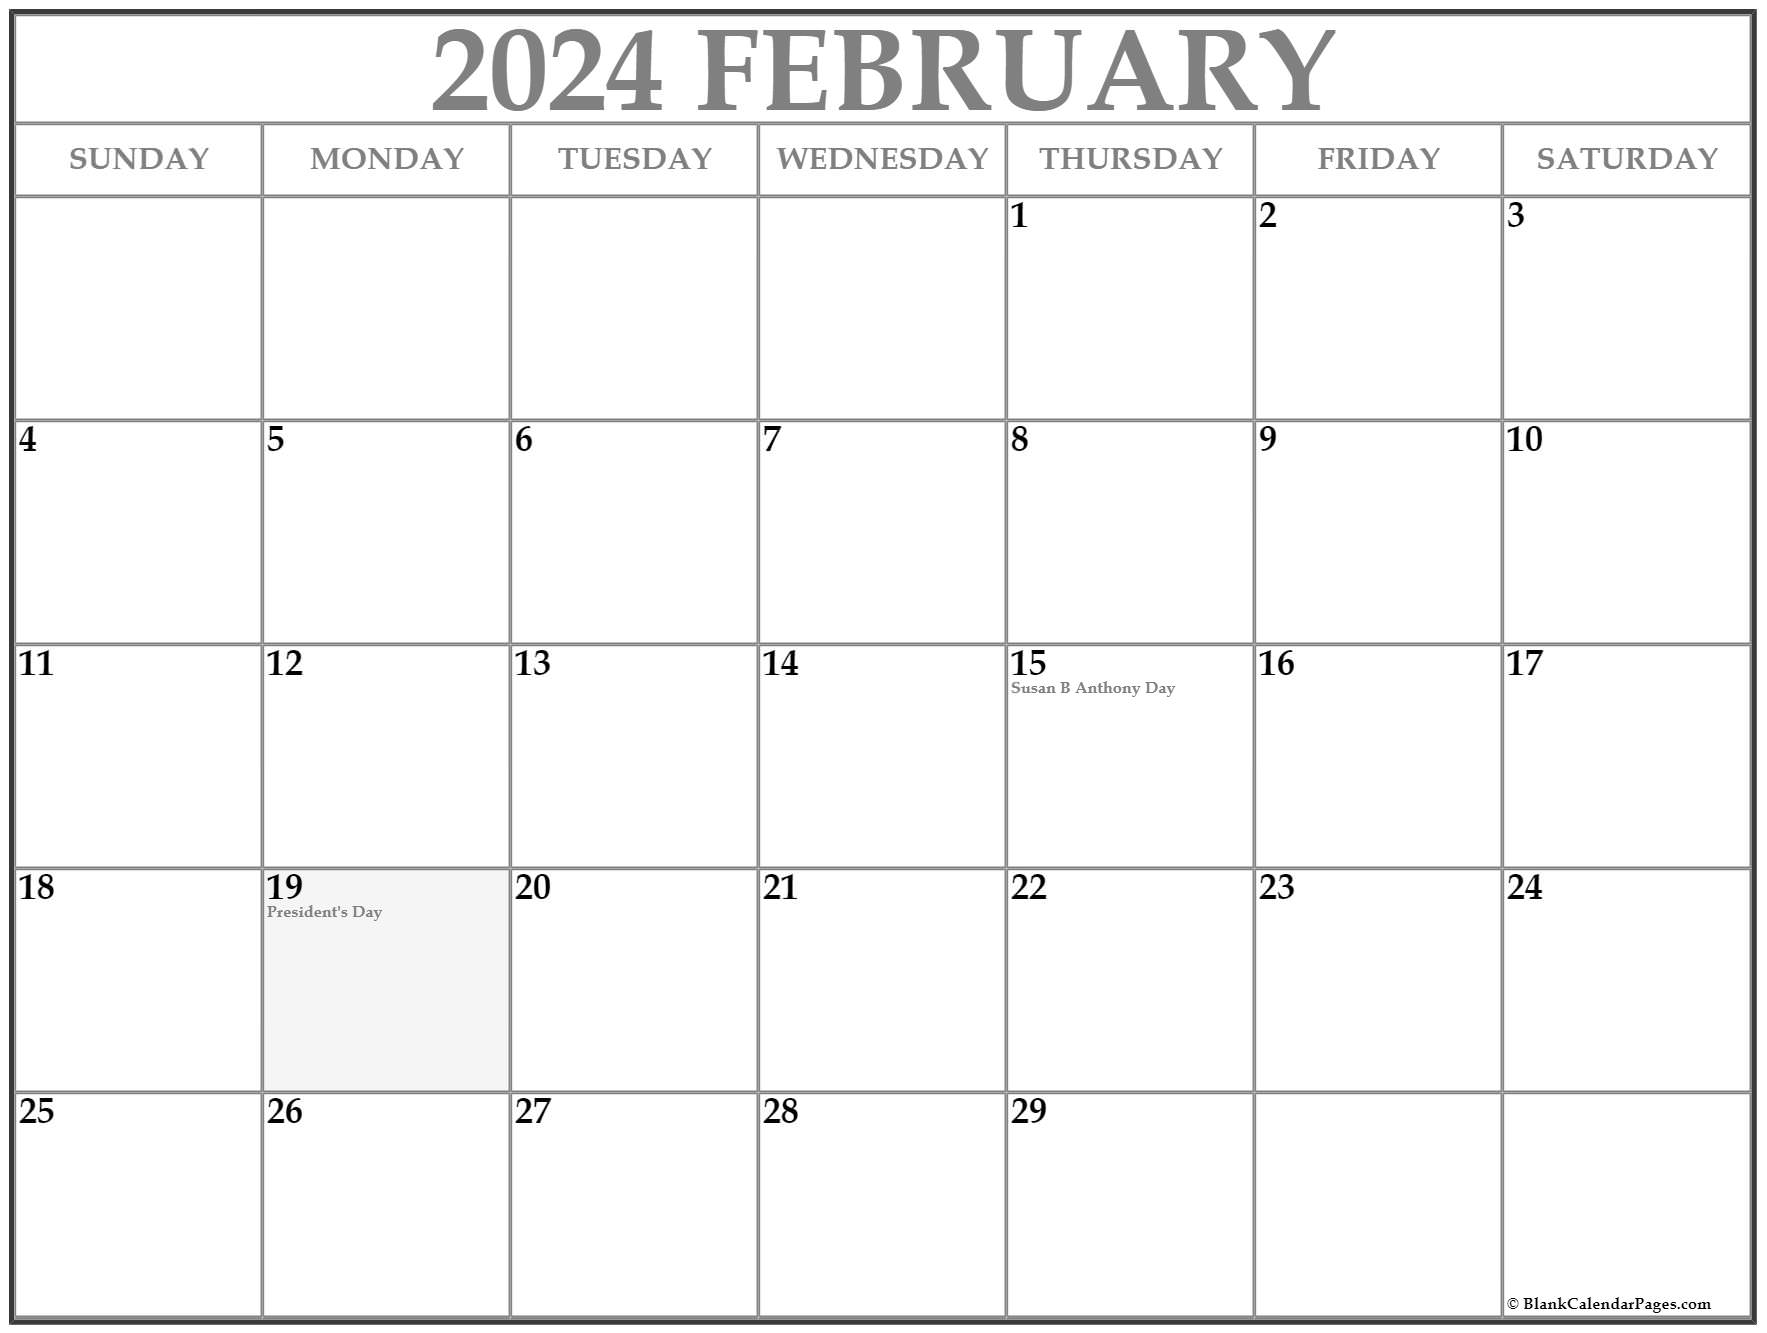 Feb Days To Celebrate 2024 Latest Top The Best Review of February